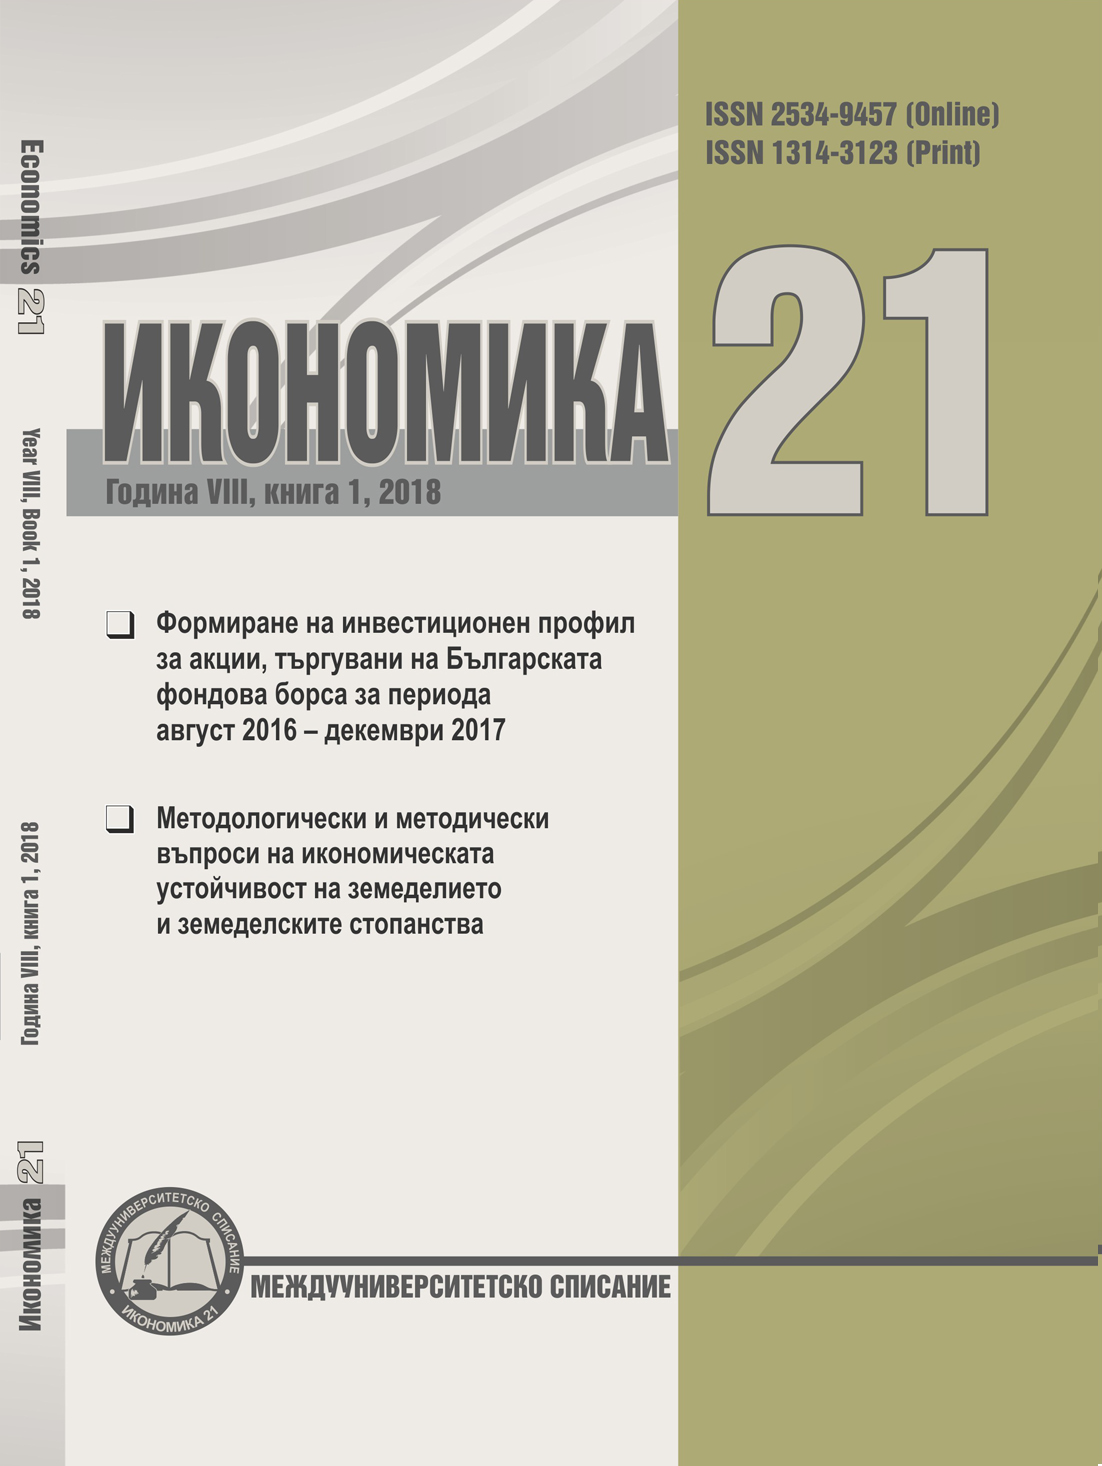 DESIGNING THE INVESTMENT PROFILE OF THE SHARES TRADED ON THE BULGARIAN STOCK EXCHANGE IN THE PERIOD FROM AUGUST 2016 TO DECEMBER 2017 Cover Image